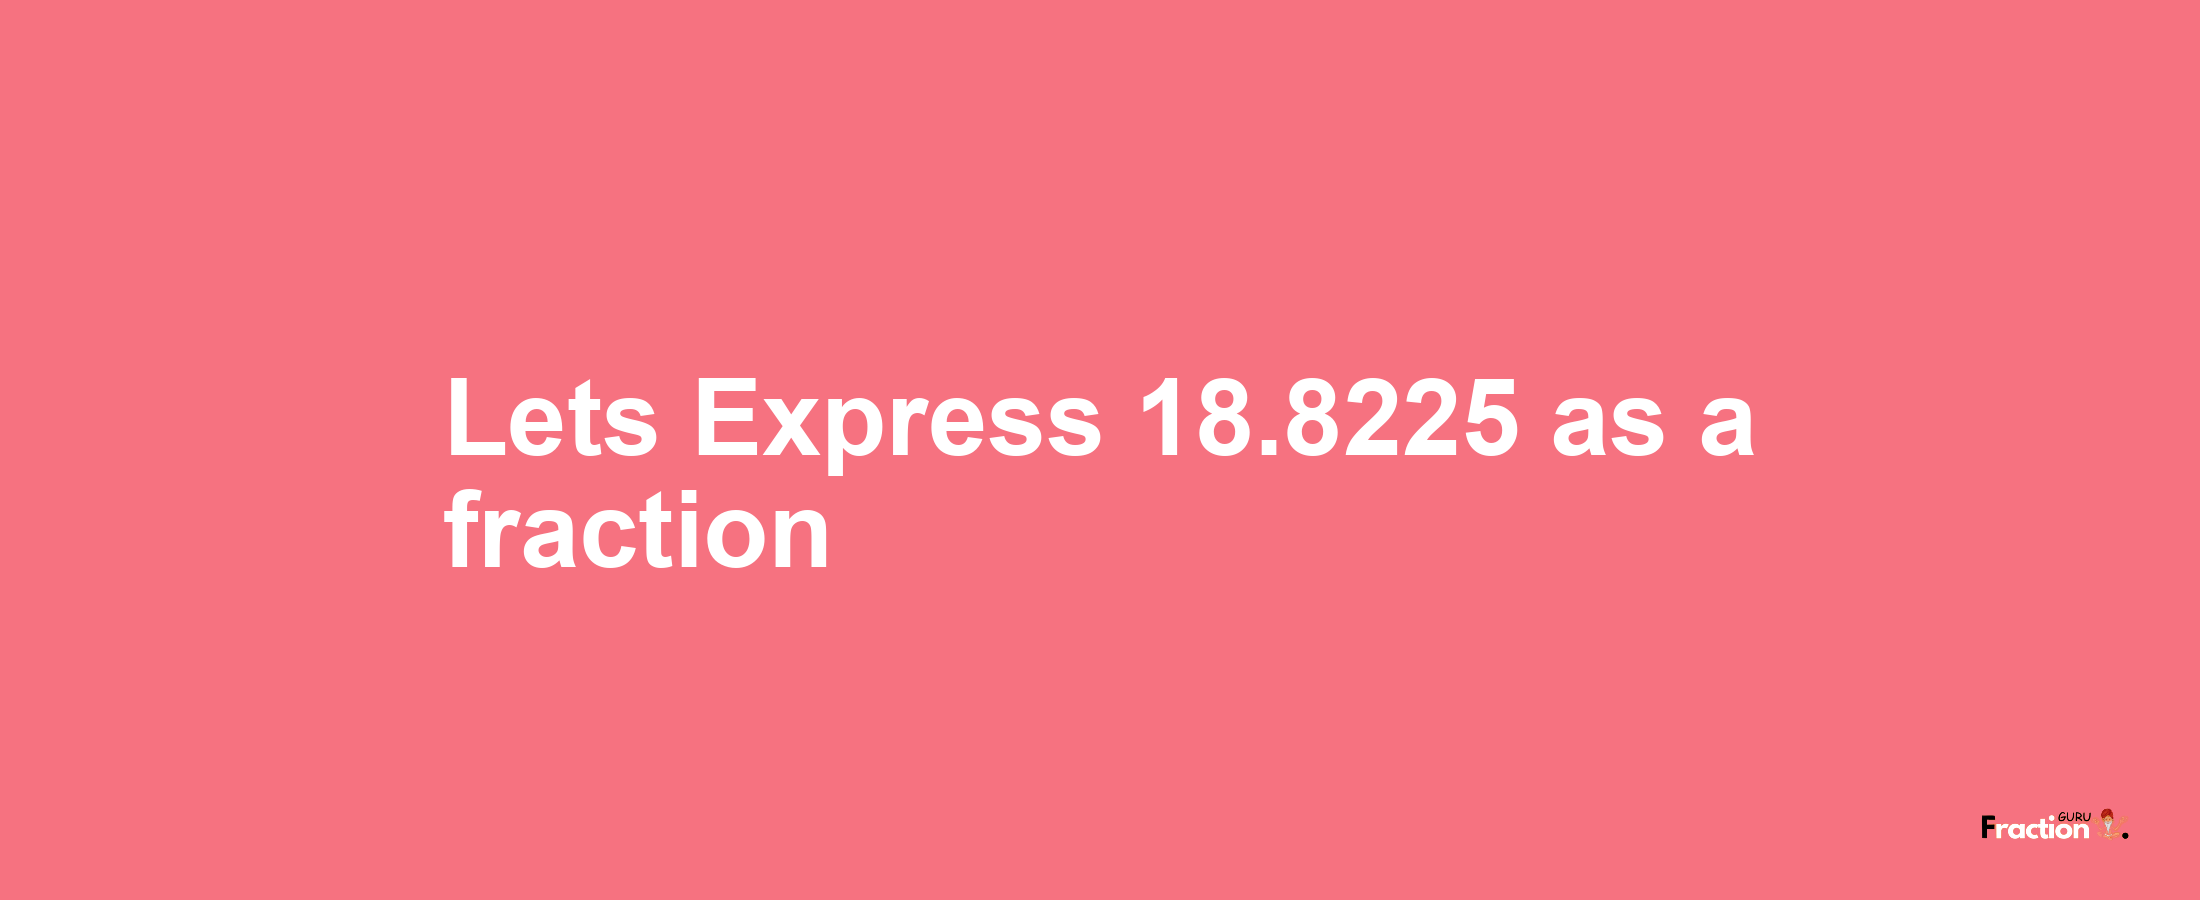 Lets Express 18.8225 as afraction